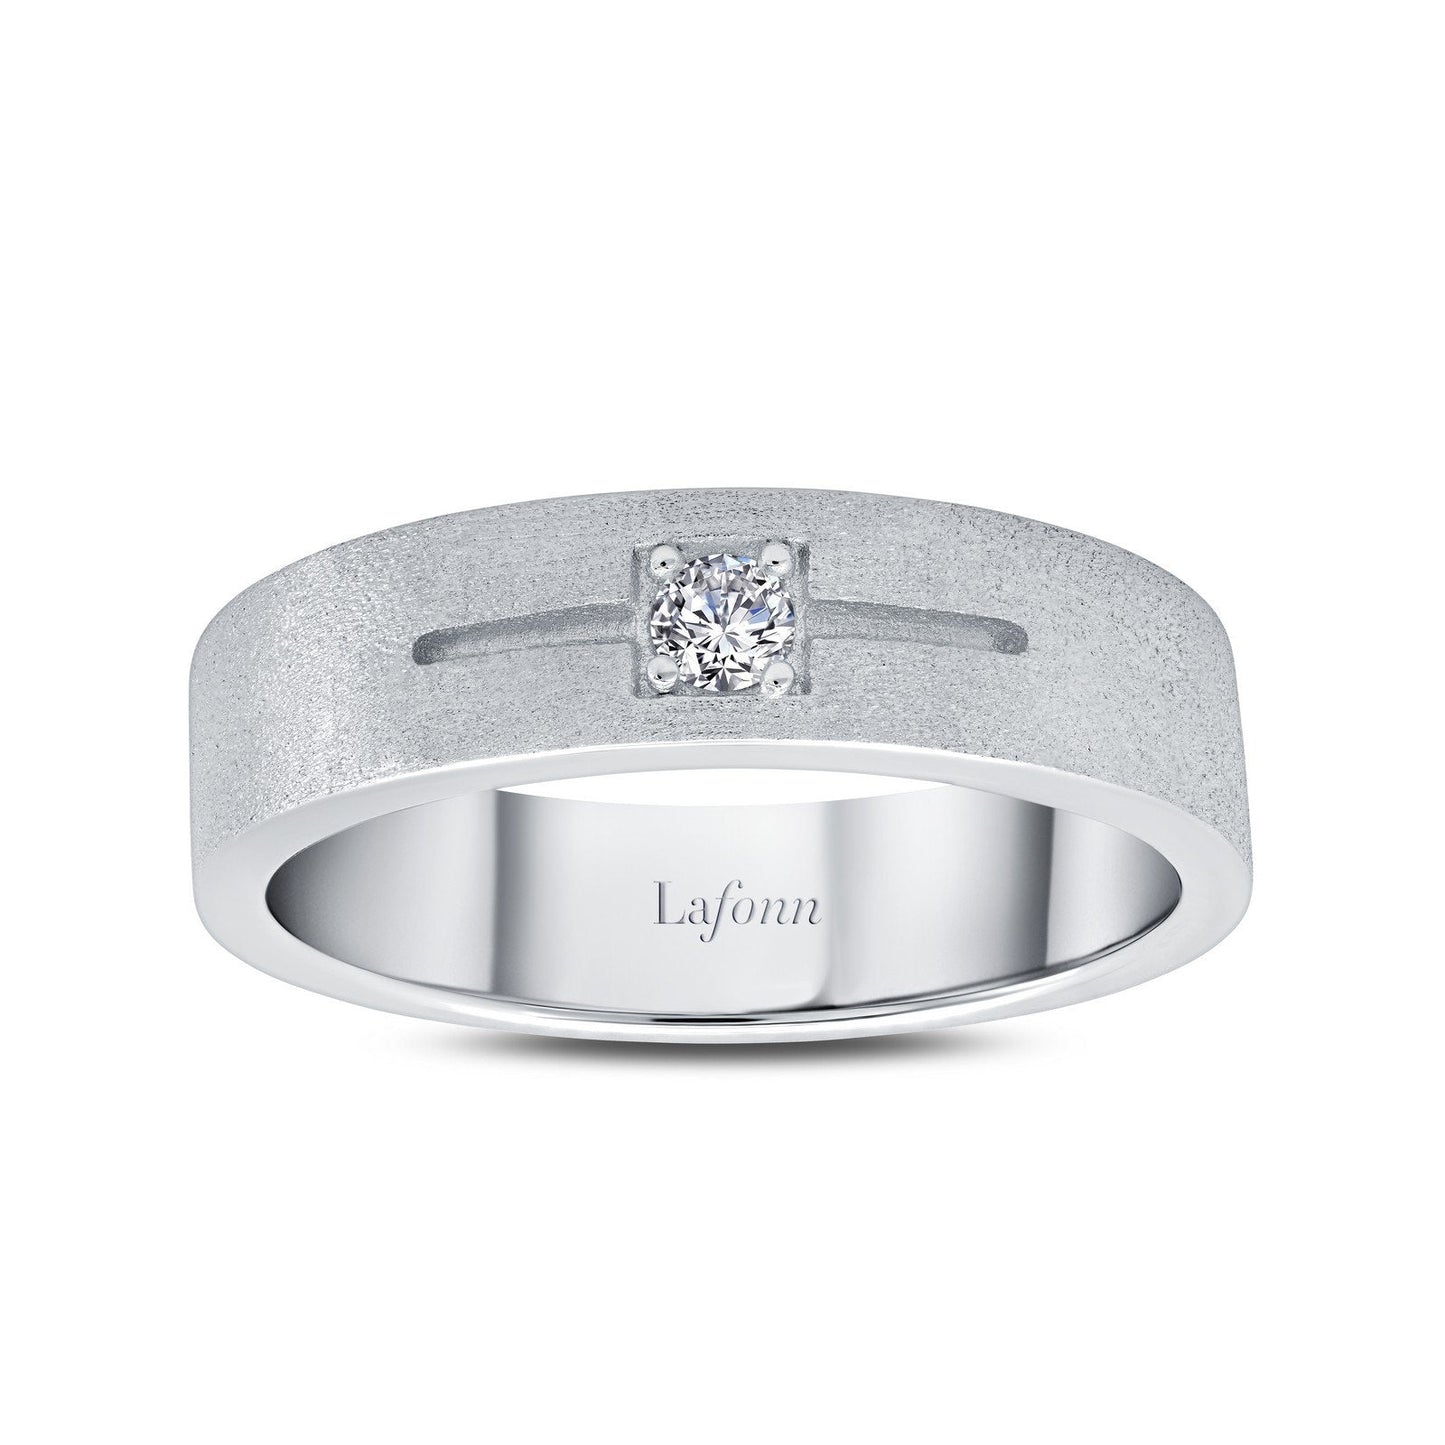 Lafonn 0.11 CTW Men's Wedding Band Simulated Diamond RINGS Size 12 Platinum 0.11 CTS Approx. 5.75mm (W)